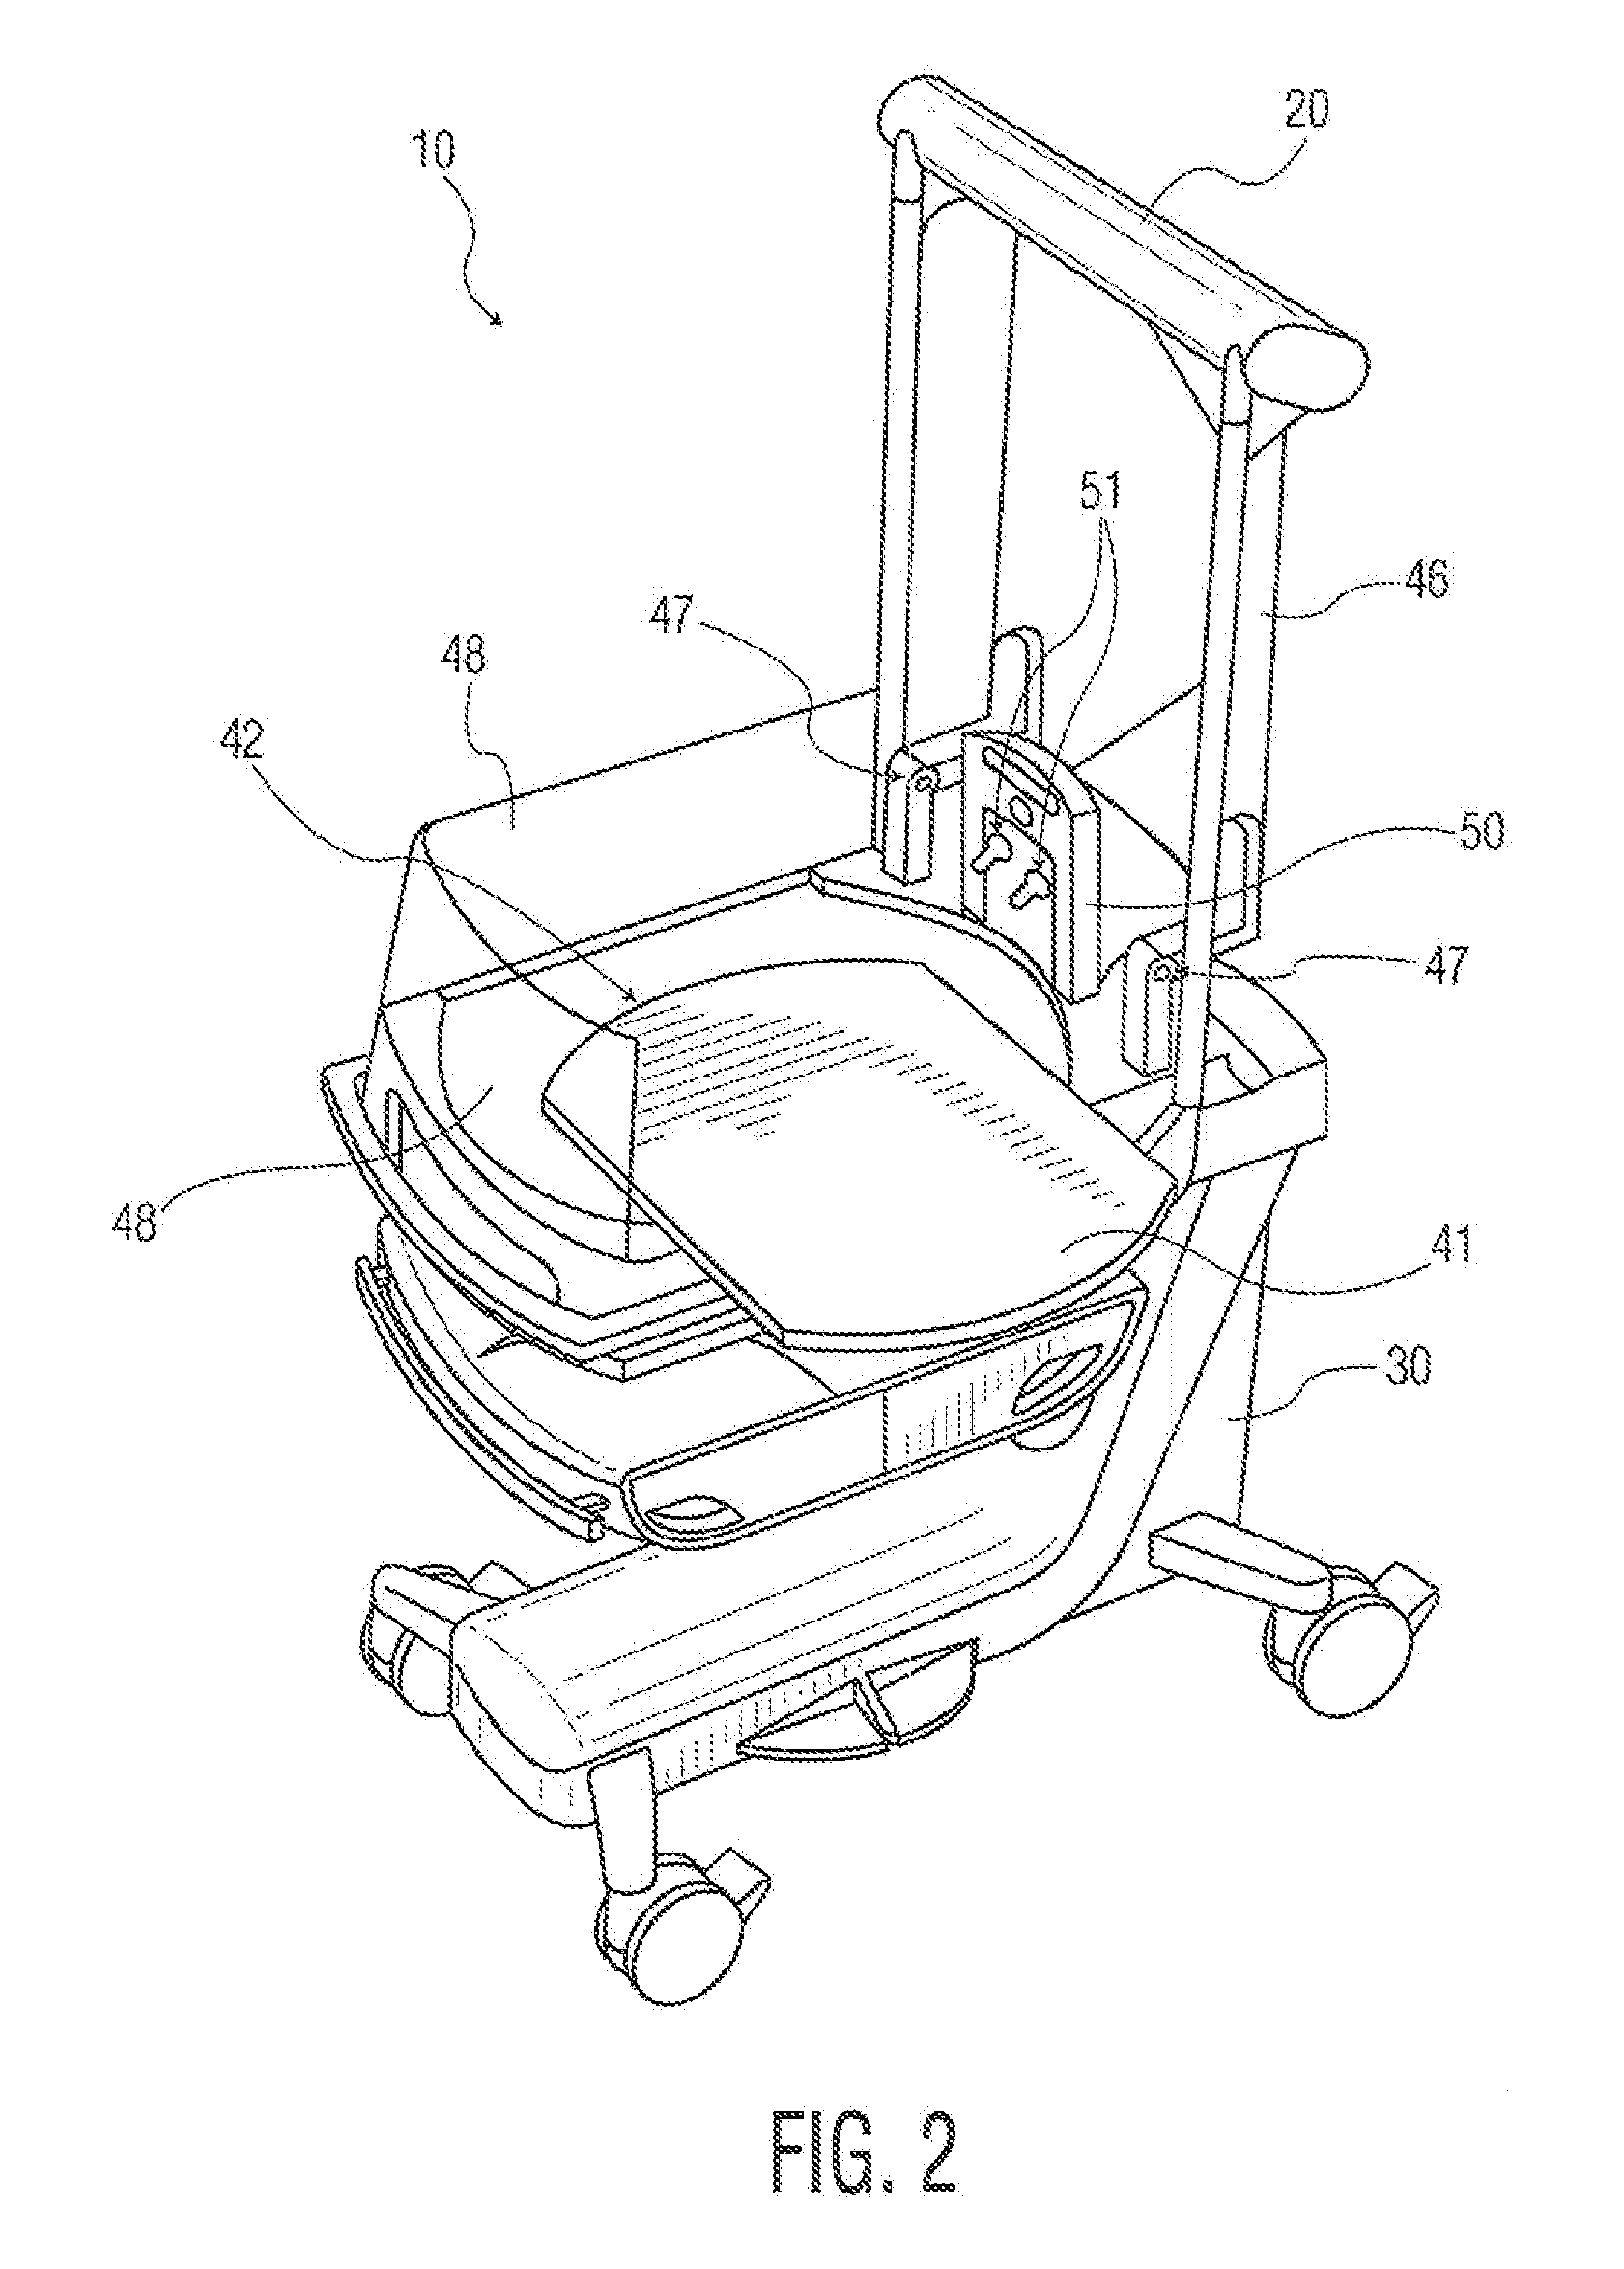 Warming therapy device including heated mattress assembly